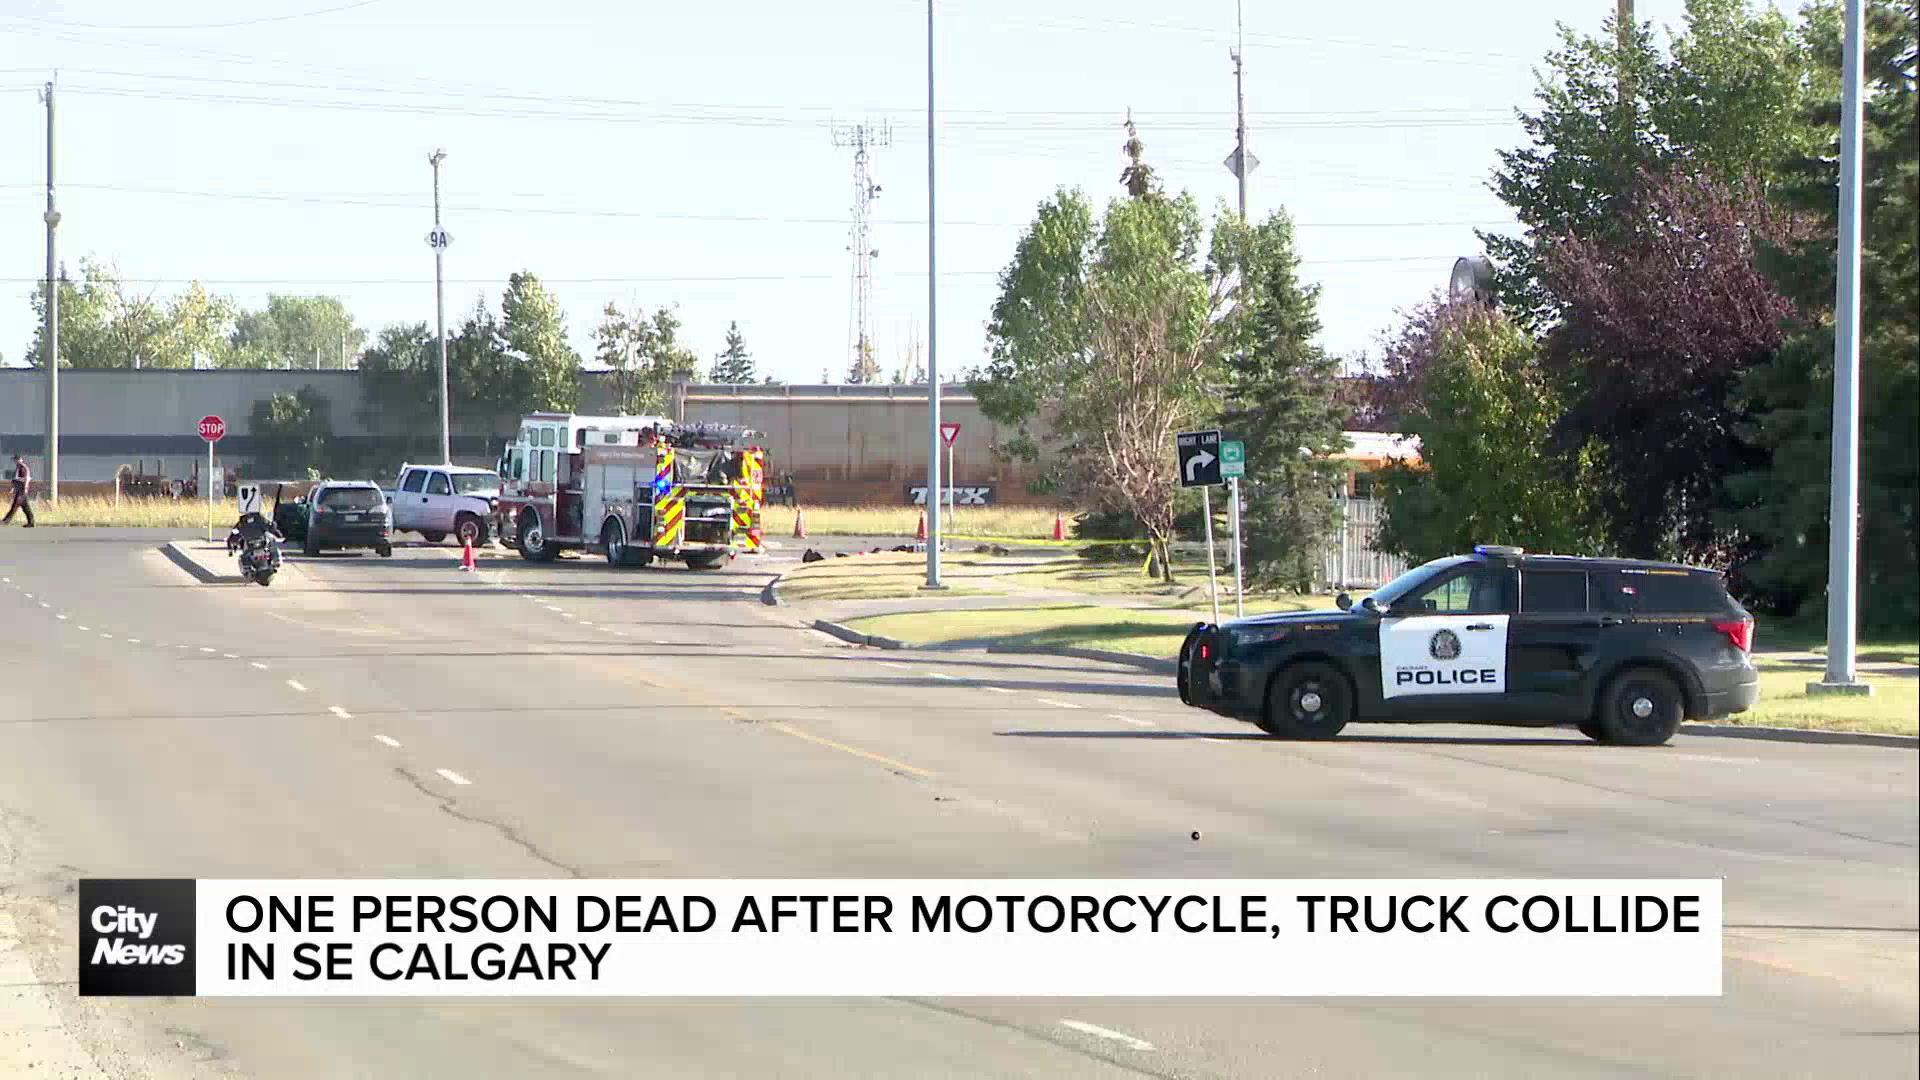 One person dead after motorcycle, truck collide in SE Calgary